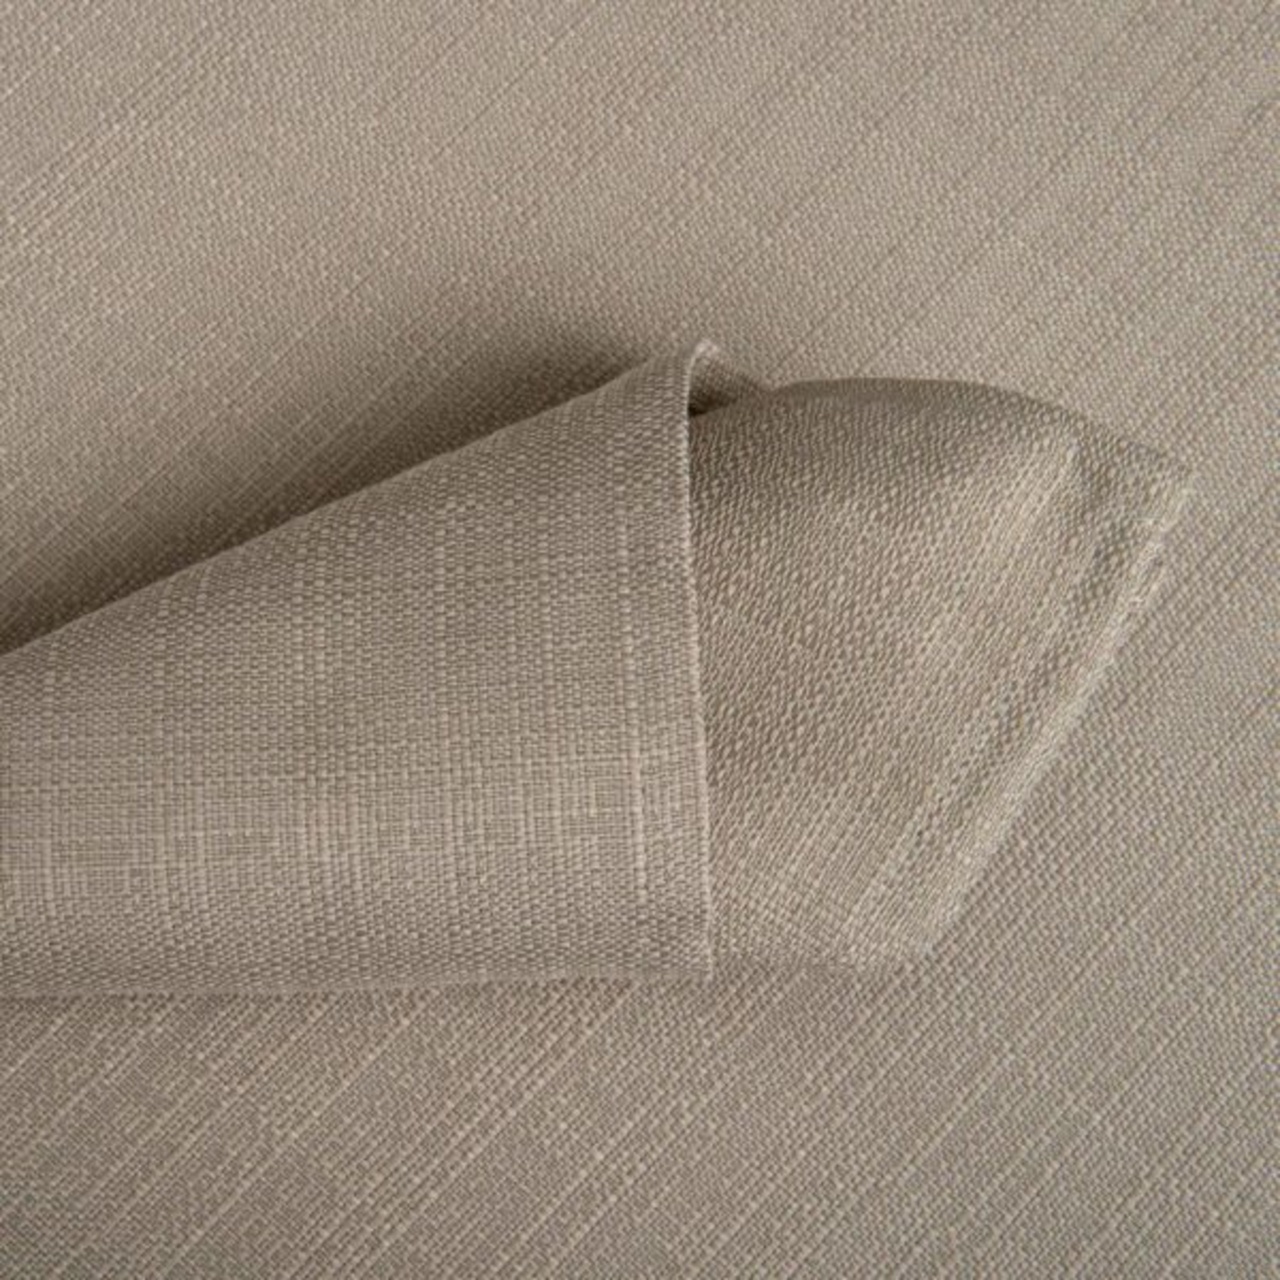 Yucca Sand Table Linen 52 Percent Polyester 48 Percent Cotton 245 Grs M2 Professional Restaurant Linvosges Hotellerie